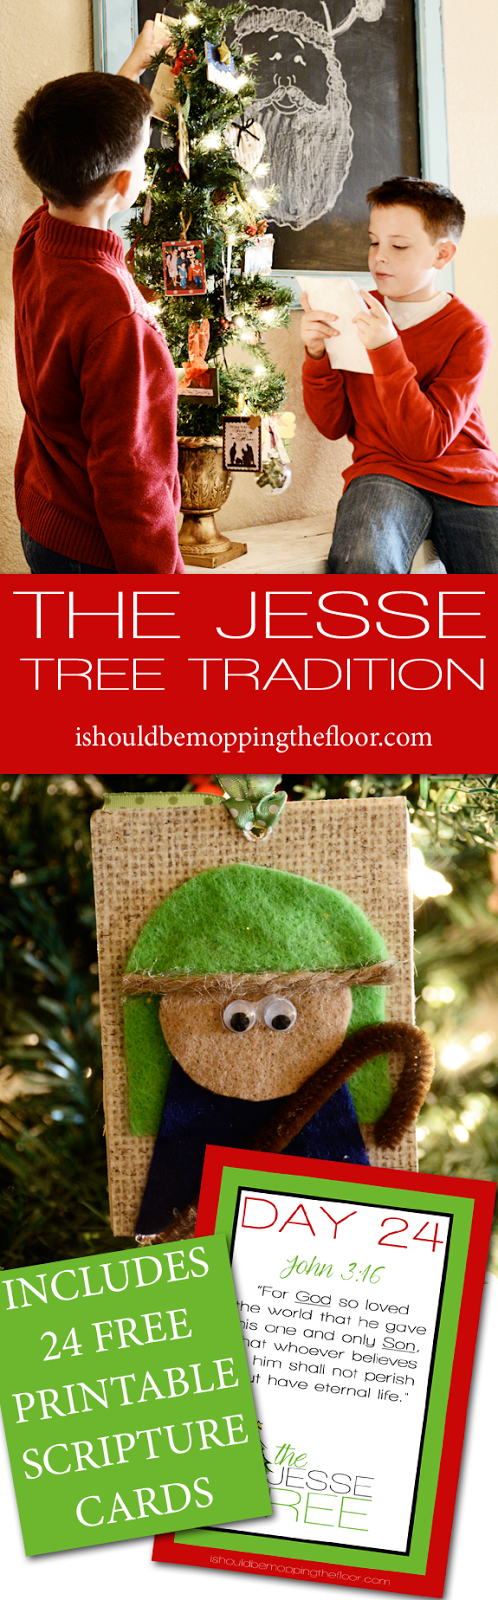 The Jesse Tree Christmas Tradition | Free Printable Scripture Cards | A unique and blessed tradition to depict the story of the birth through ornaments and scriptures.